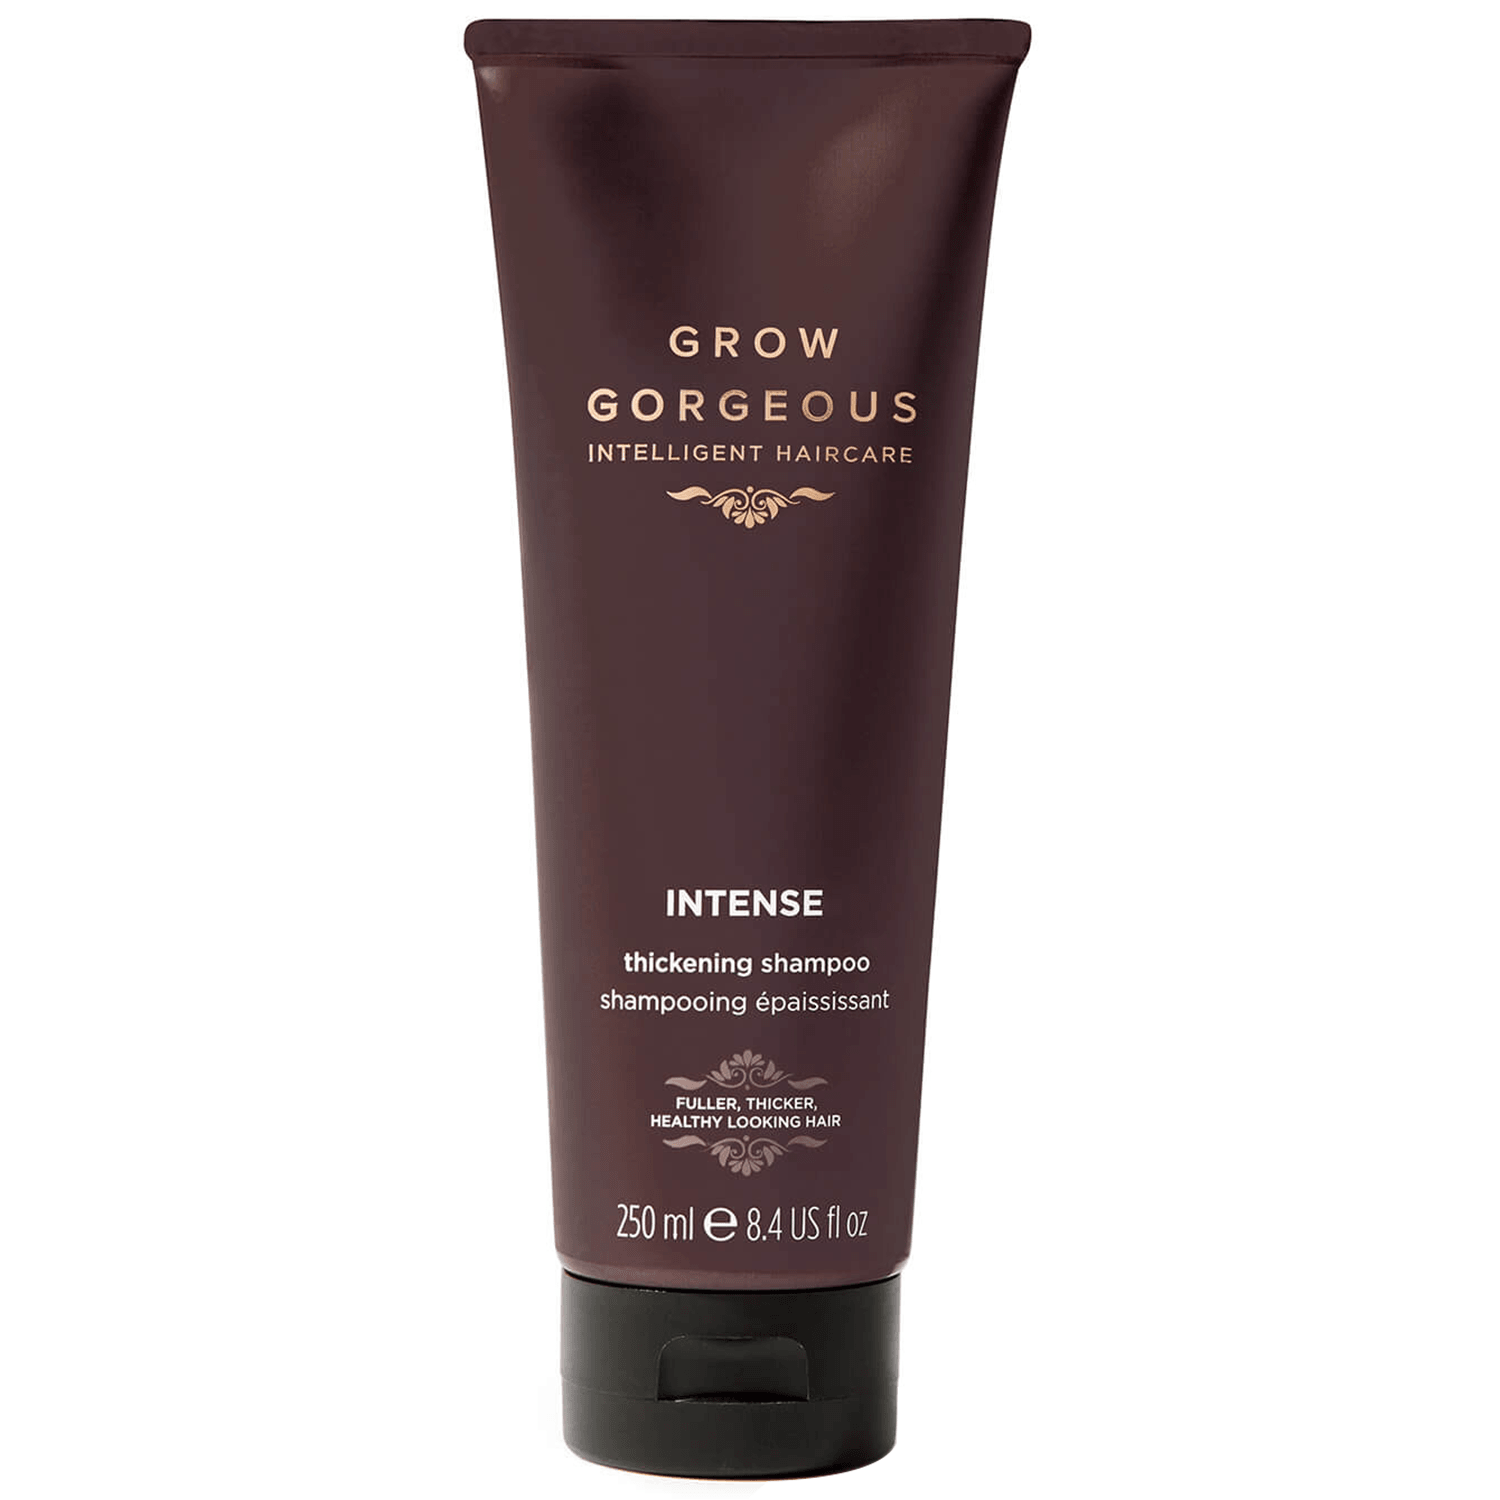 Grow Gorgeous Intense Thickening Shampoo at Socialite Beauty Canada